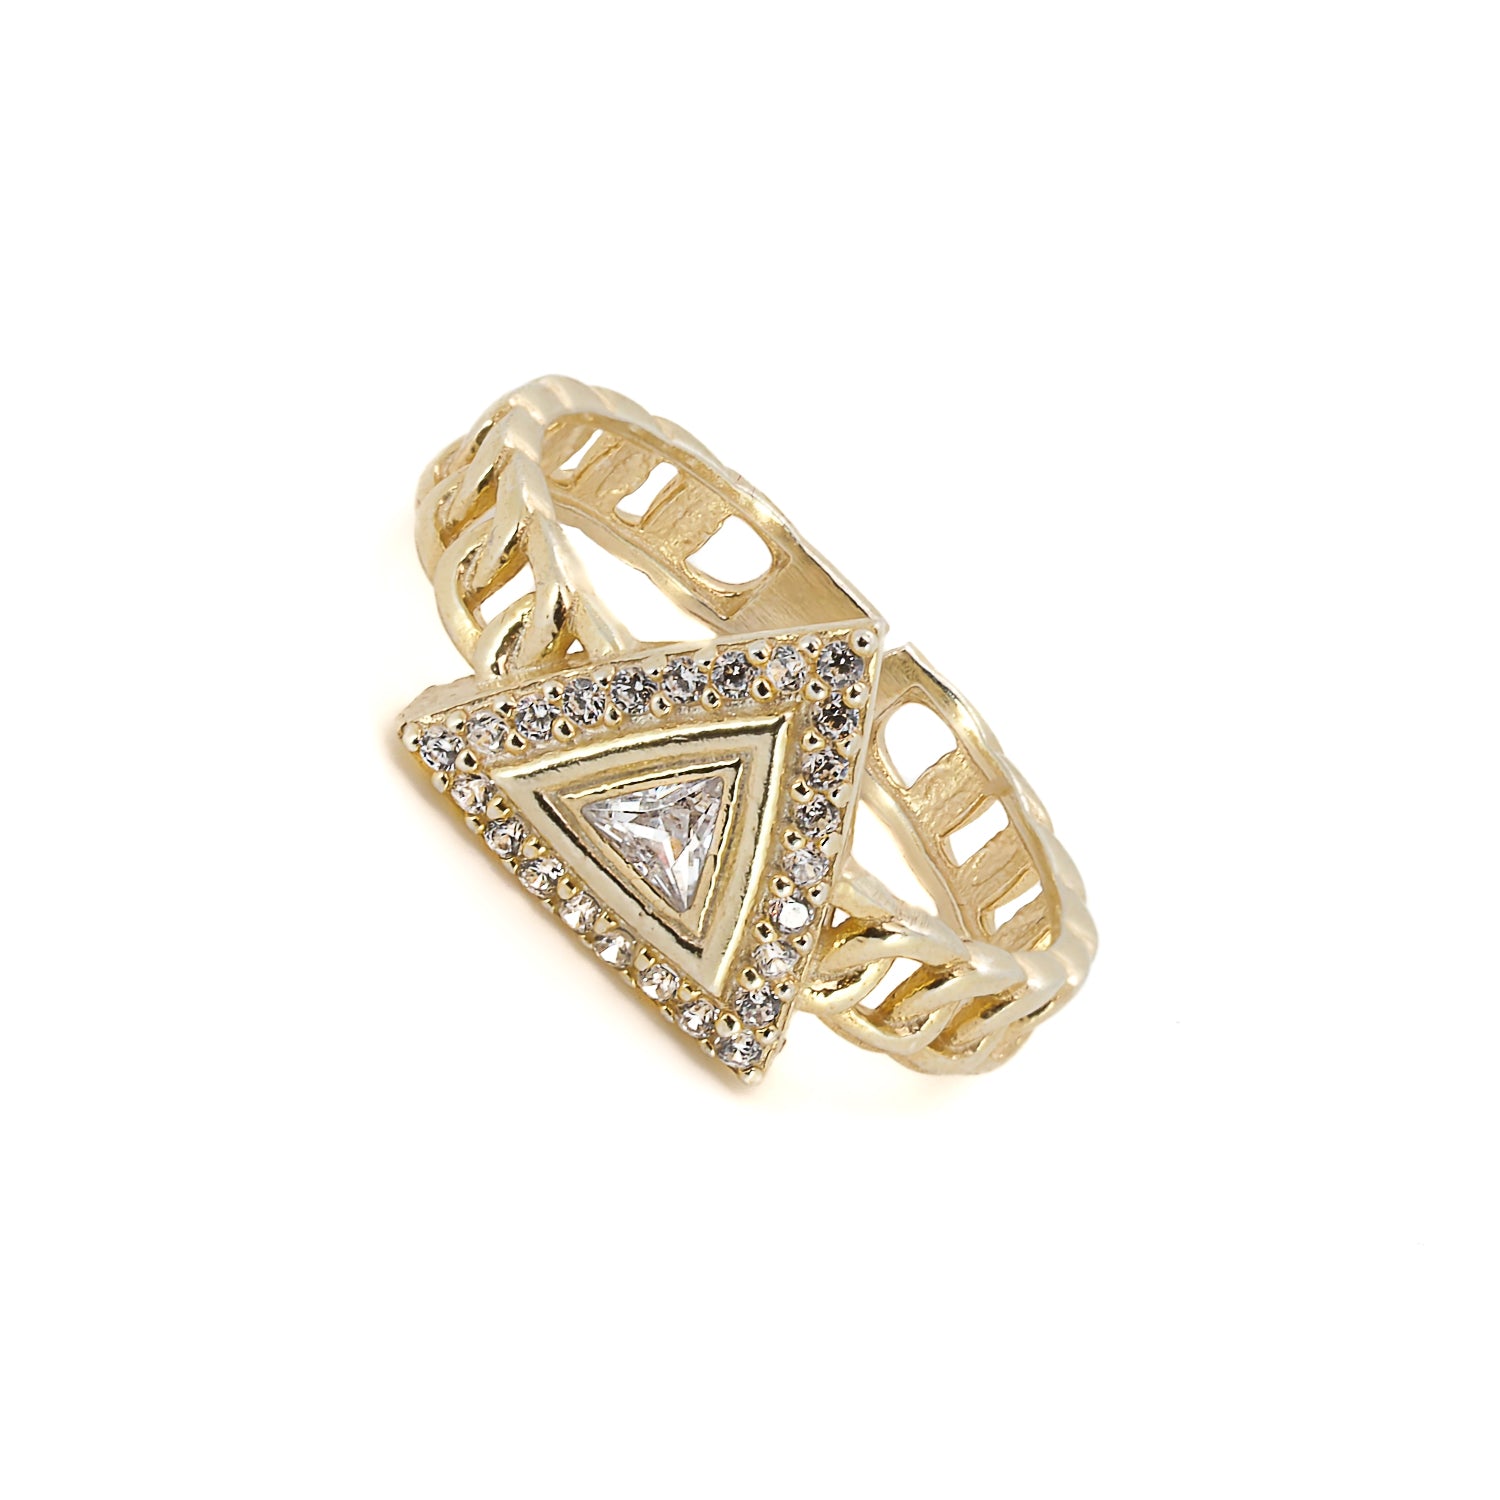 A closer look at the Gold Vermeil Diamond Ring's exquisite design.